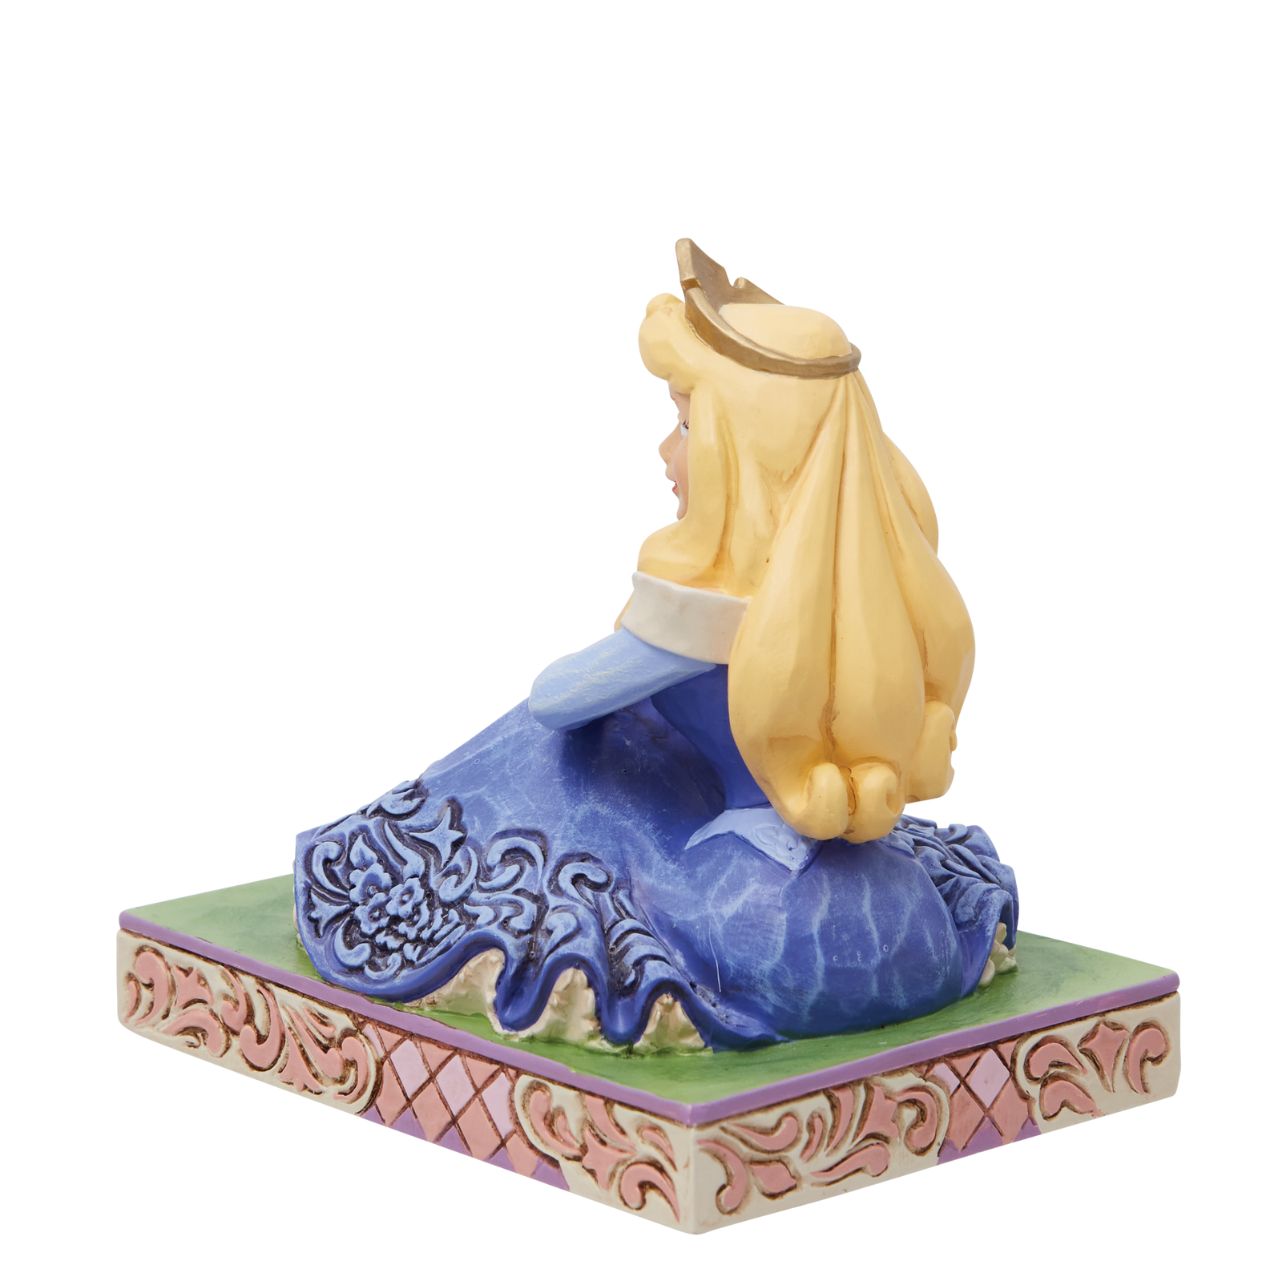 Disney Traditions Princess Aurora Personality Pose Figurine by Jim Shore  This beautiful personality pose features Disney's beloved Princess Aurora, showcasing what she is known for; grace & being gentle. Designed by award winning artist Jim Shore, hand crafted using high quality cast stone and hand painted.